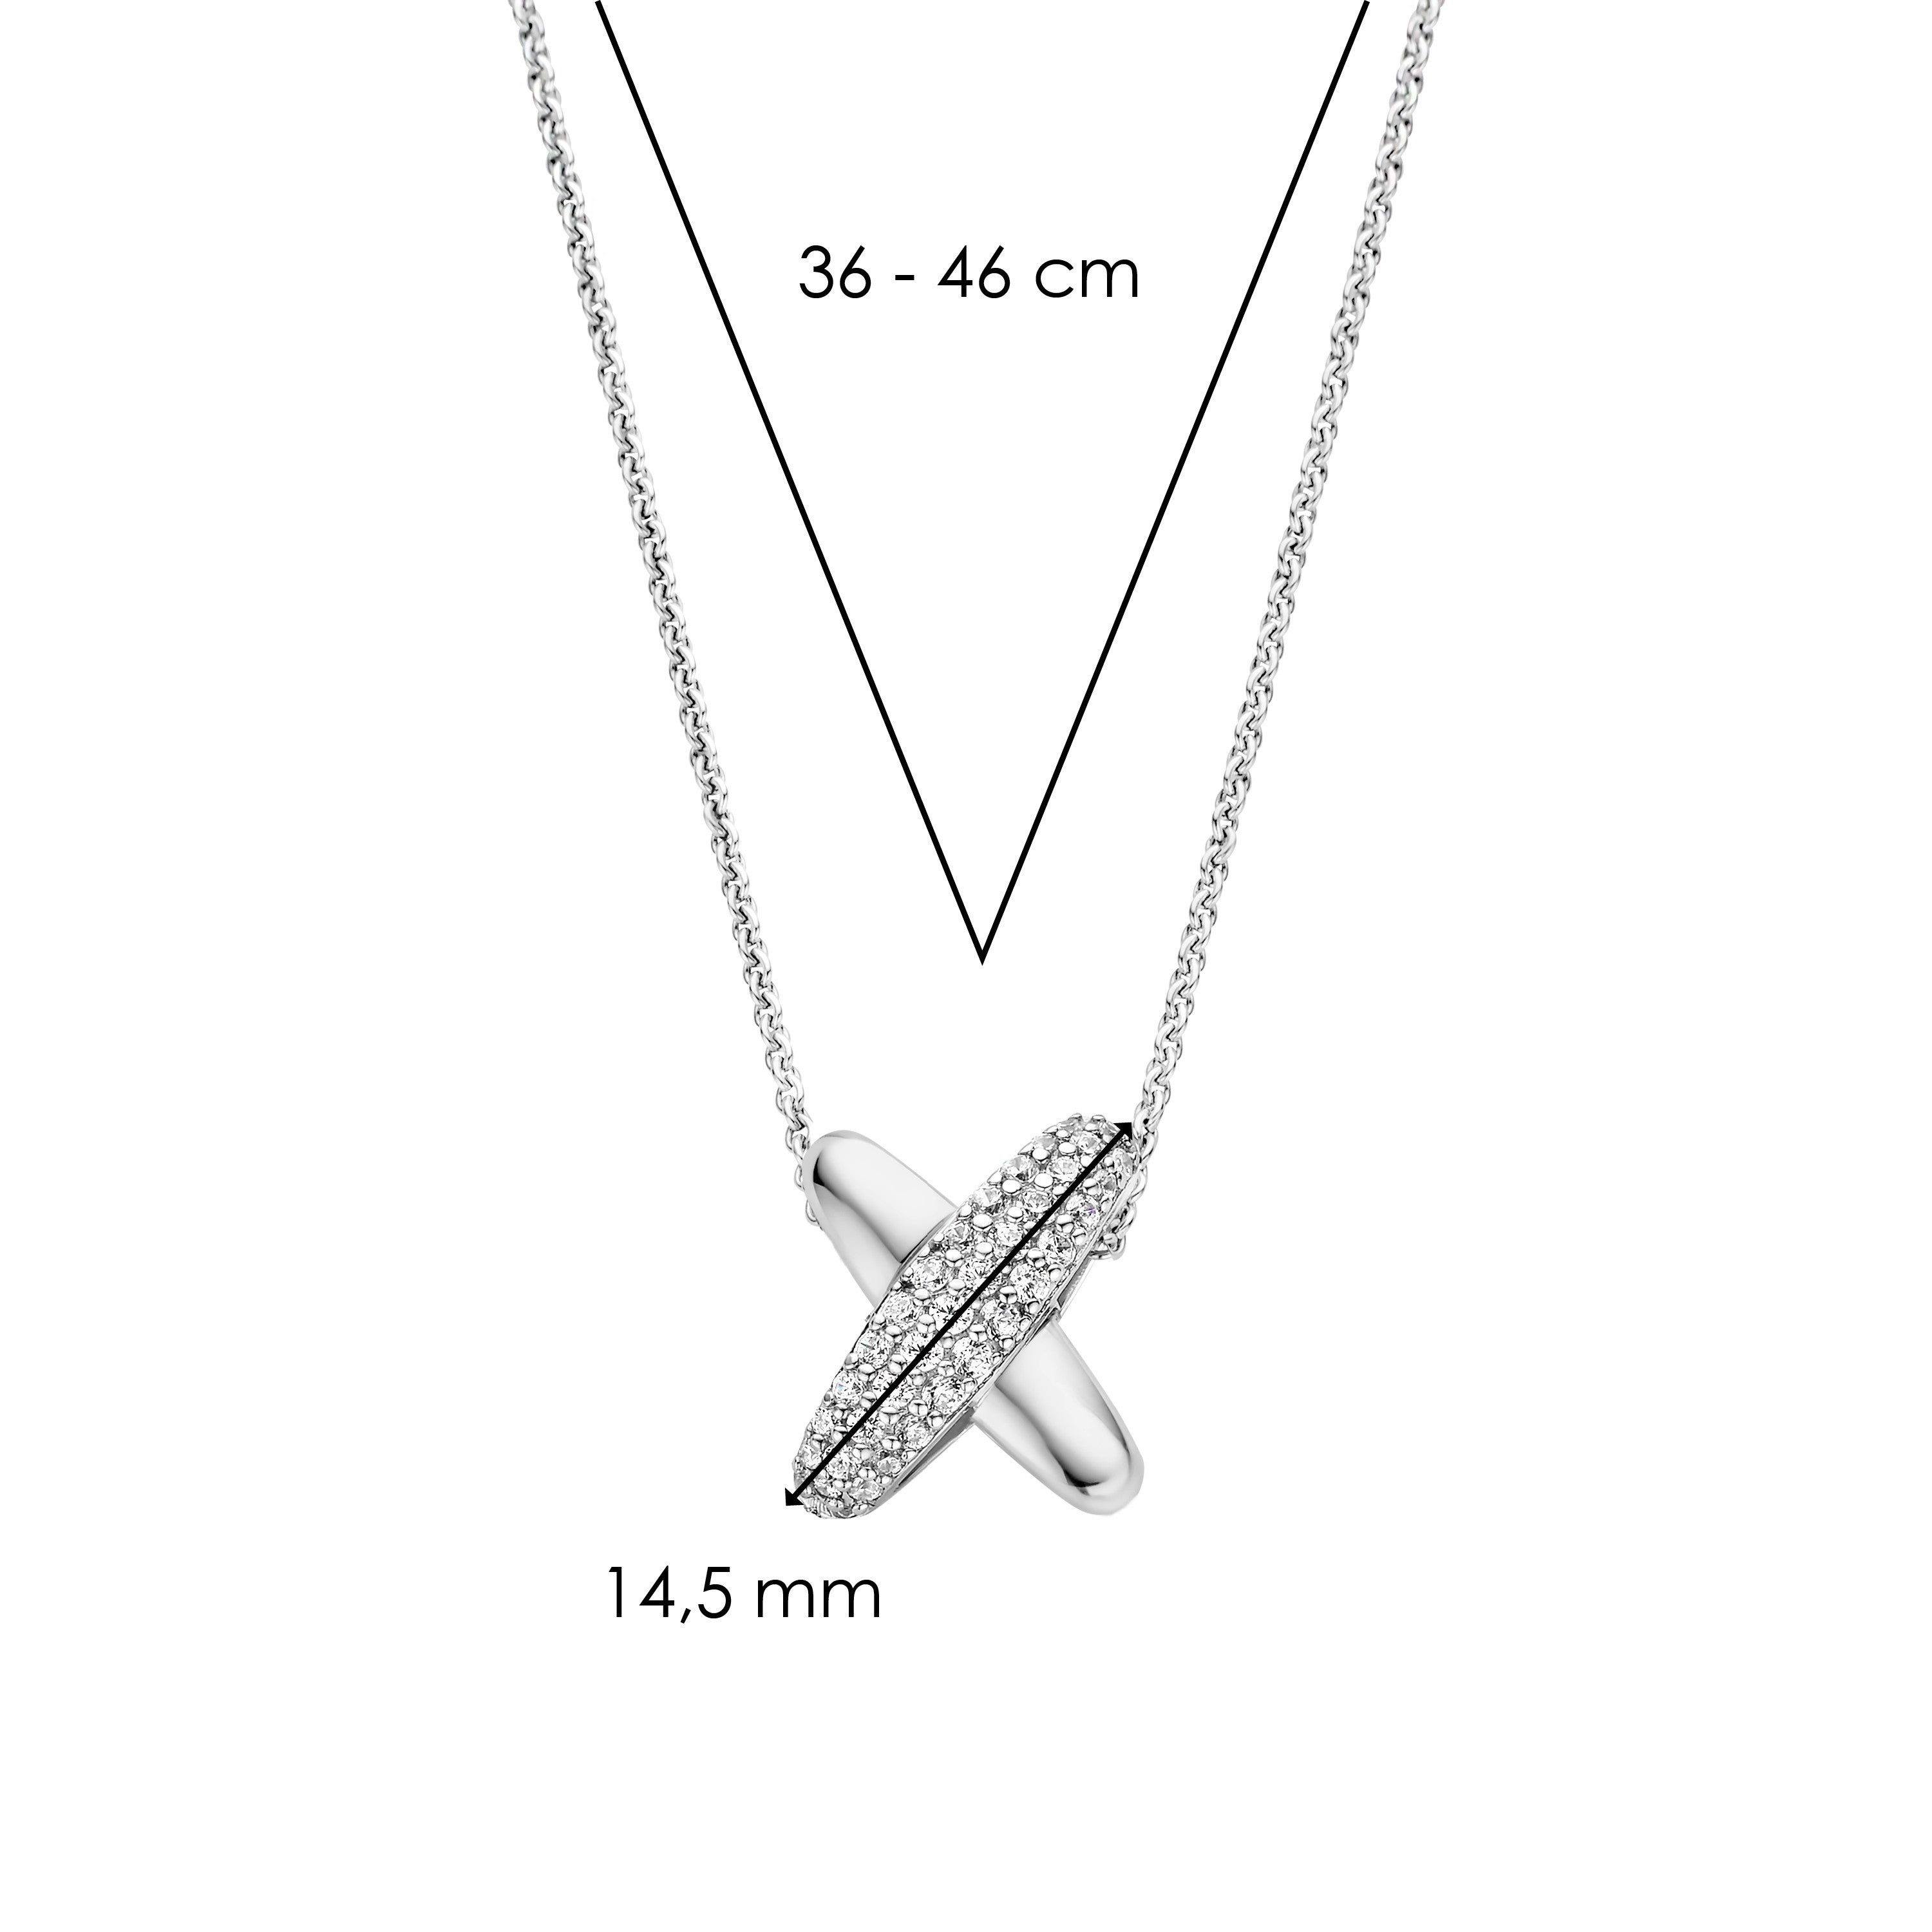 STERLING SILVER/CUBIC ZIRCONIA 'X' NECKLACE